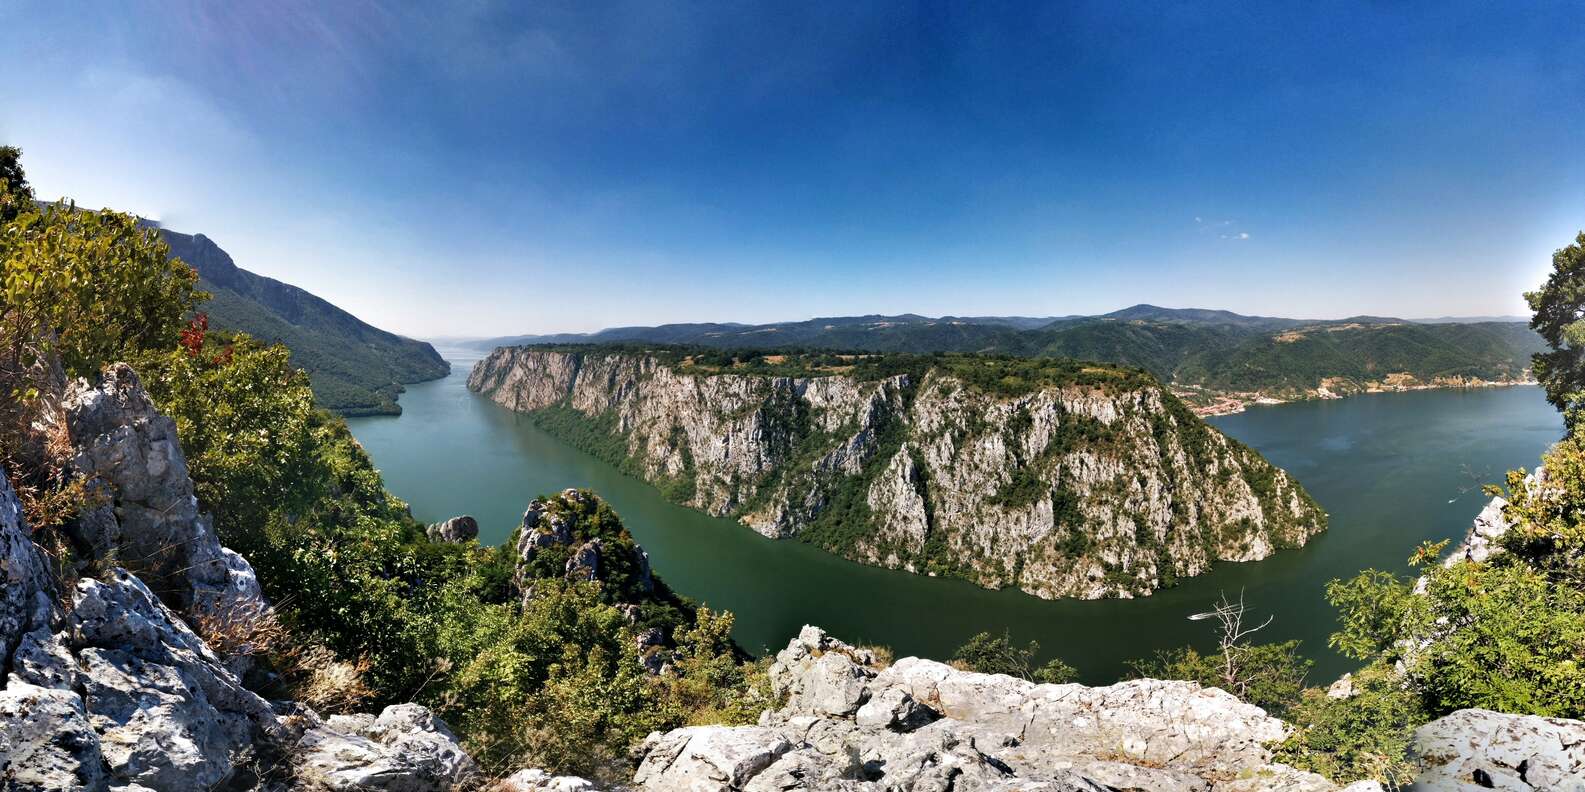 What to do in Golubac